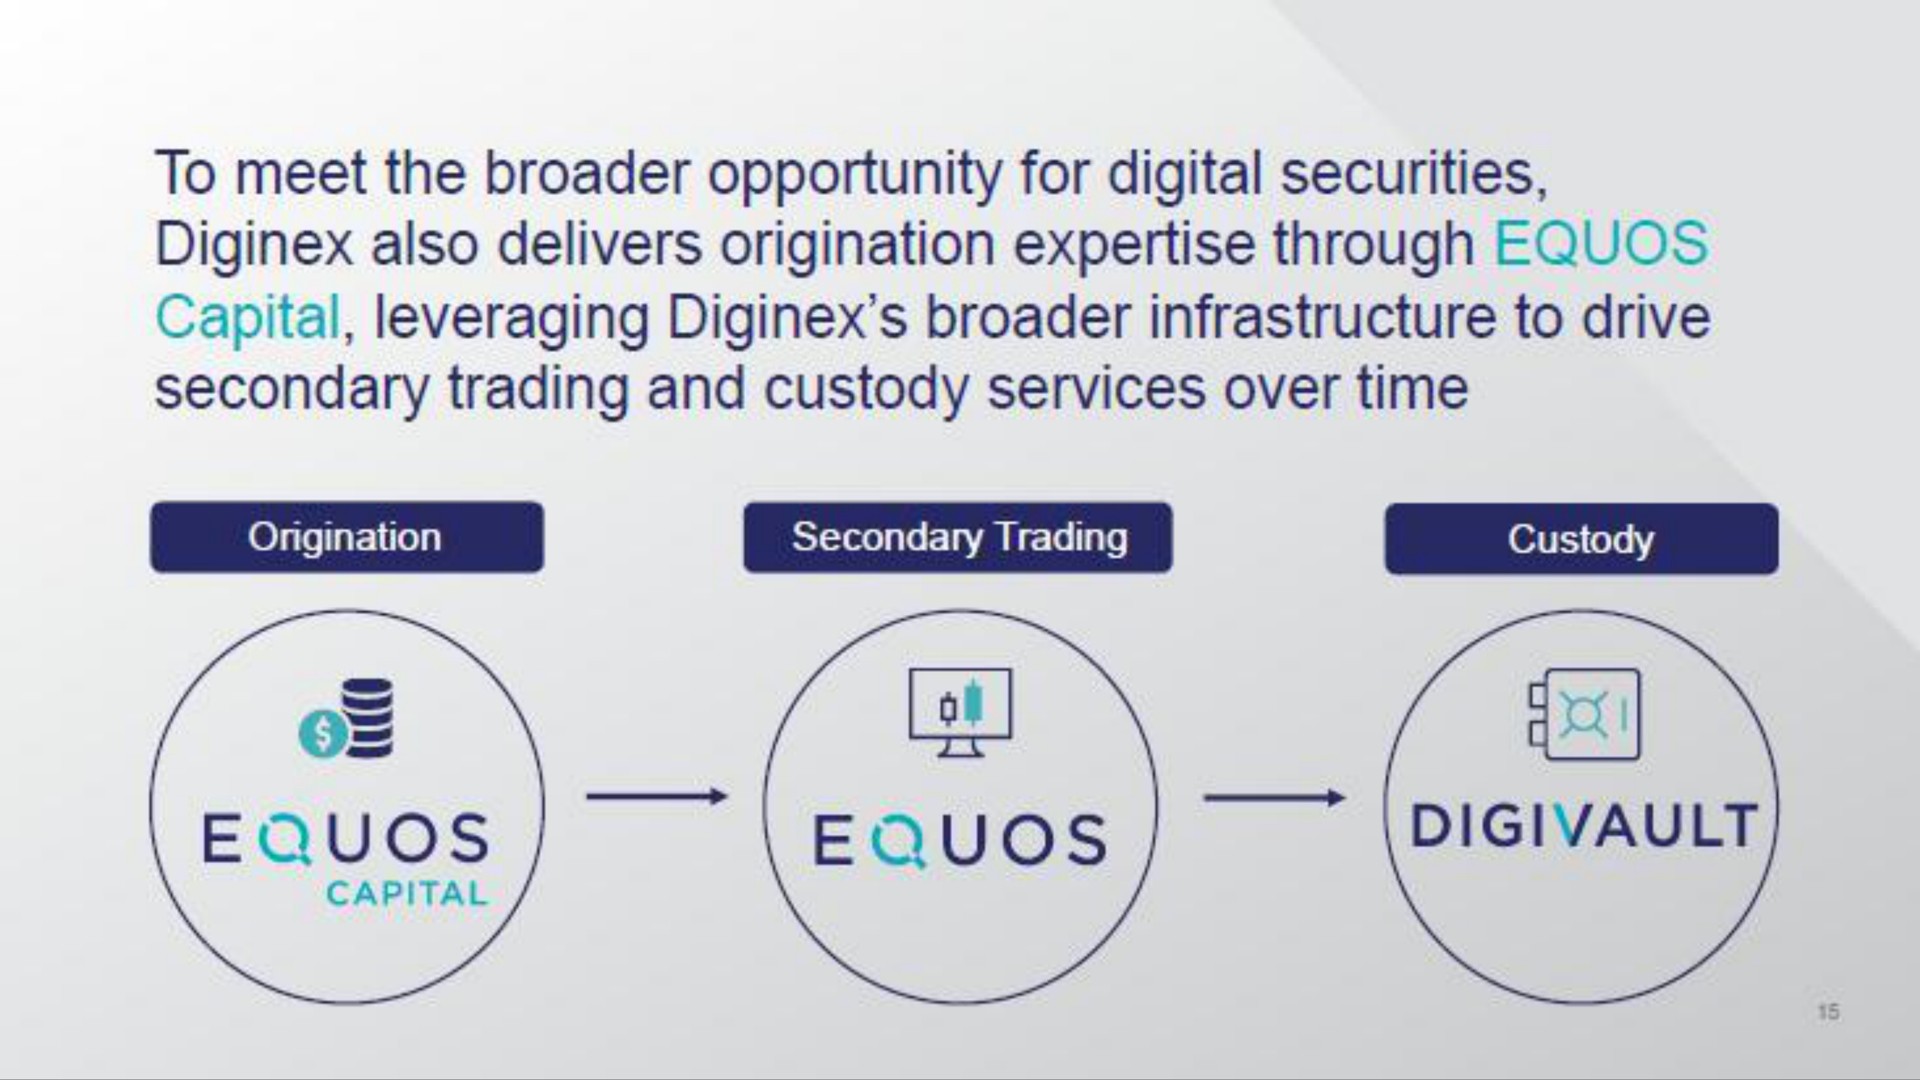 to meet the opportunity for digital securities also delivers origination through capital leveraging infrastructure to drive secondary trading and custody services over time | Diginex